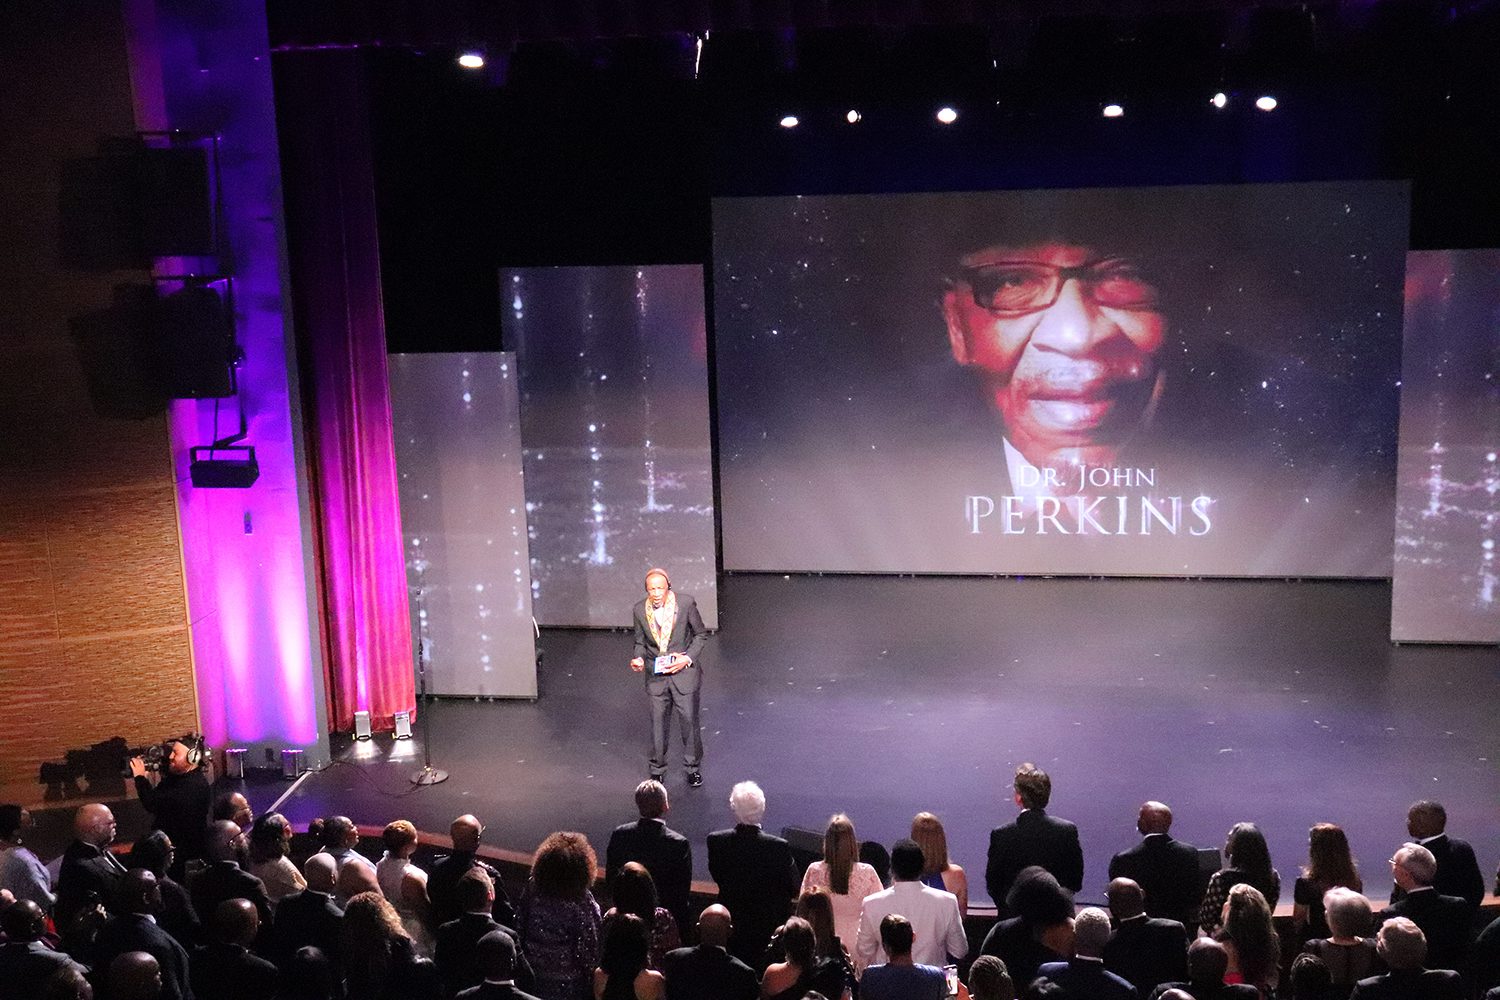 John Perkins speaks after being awarded at the “Blessings of the Elders” ceremony at the Museum of the Bible, Thursday, June 23, 2022, in Washington. RNS photo by Adelle M. Banks